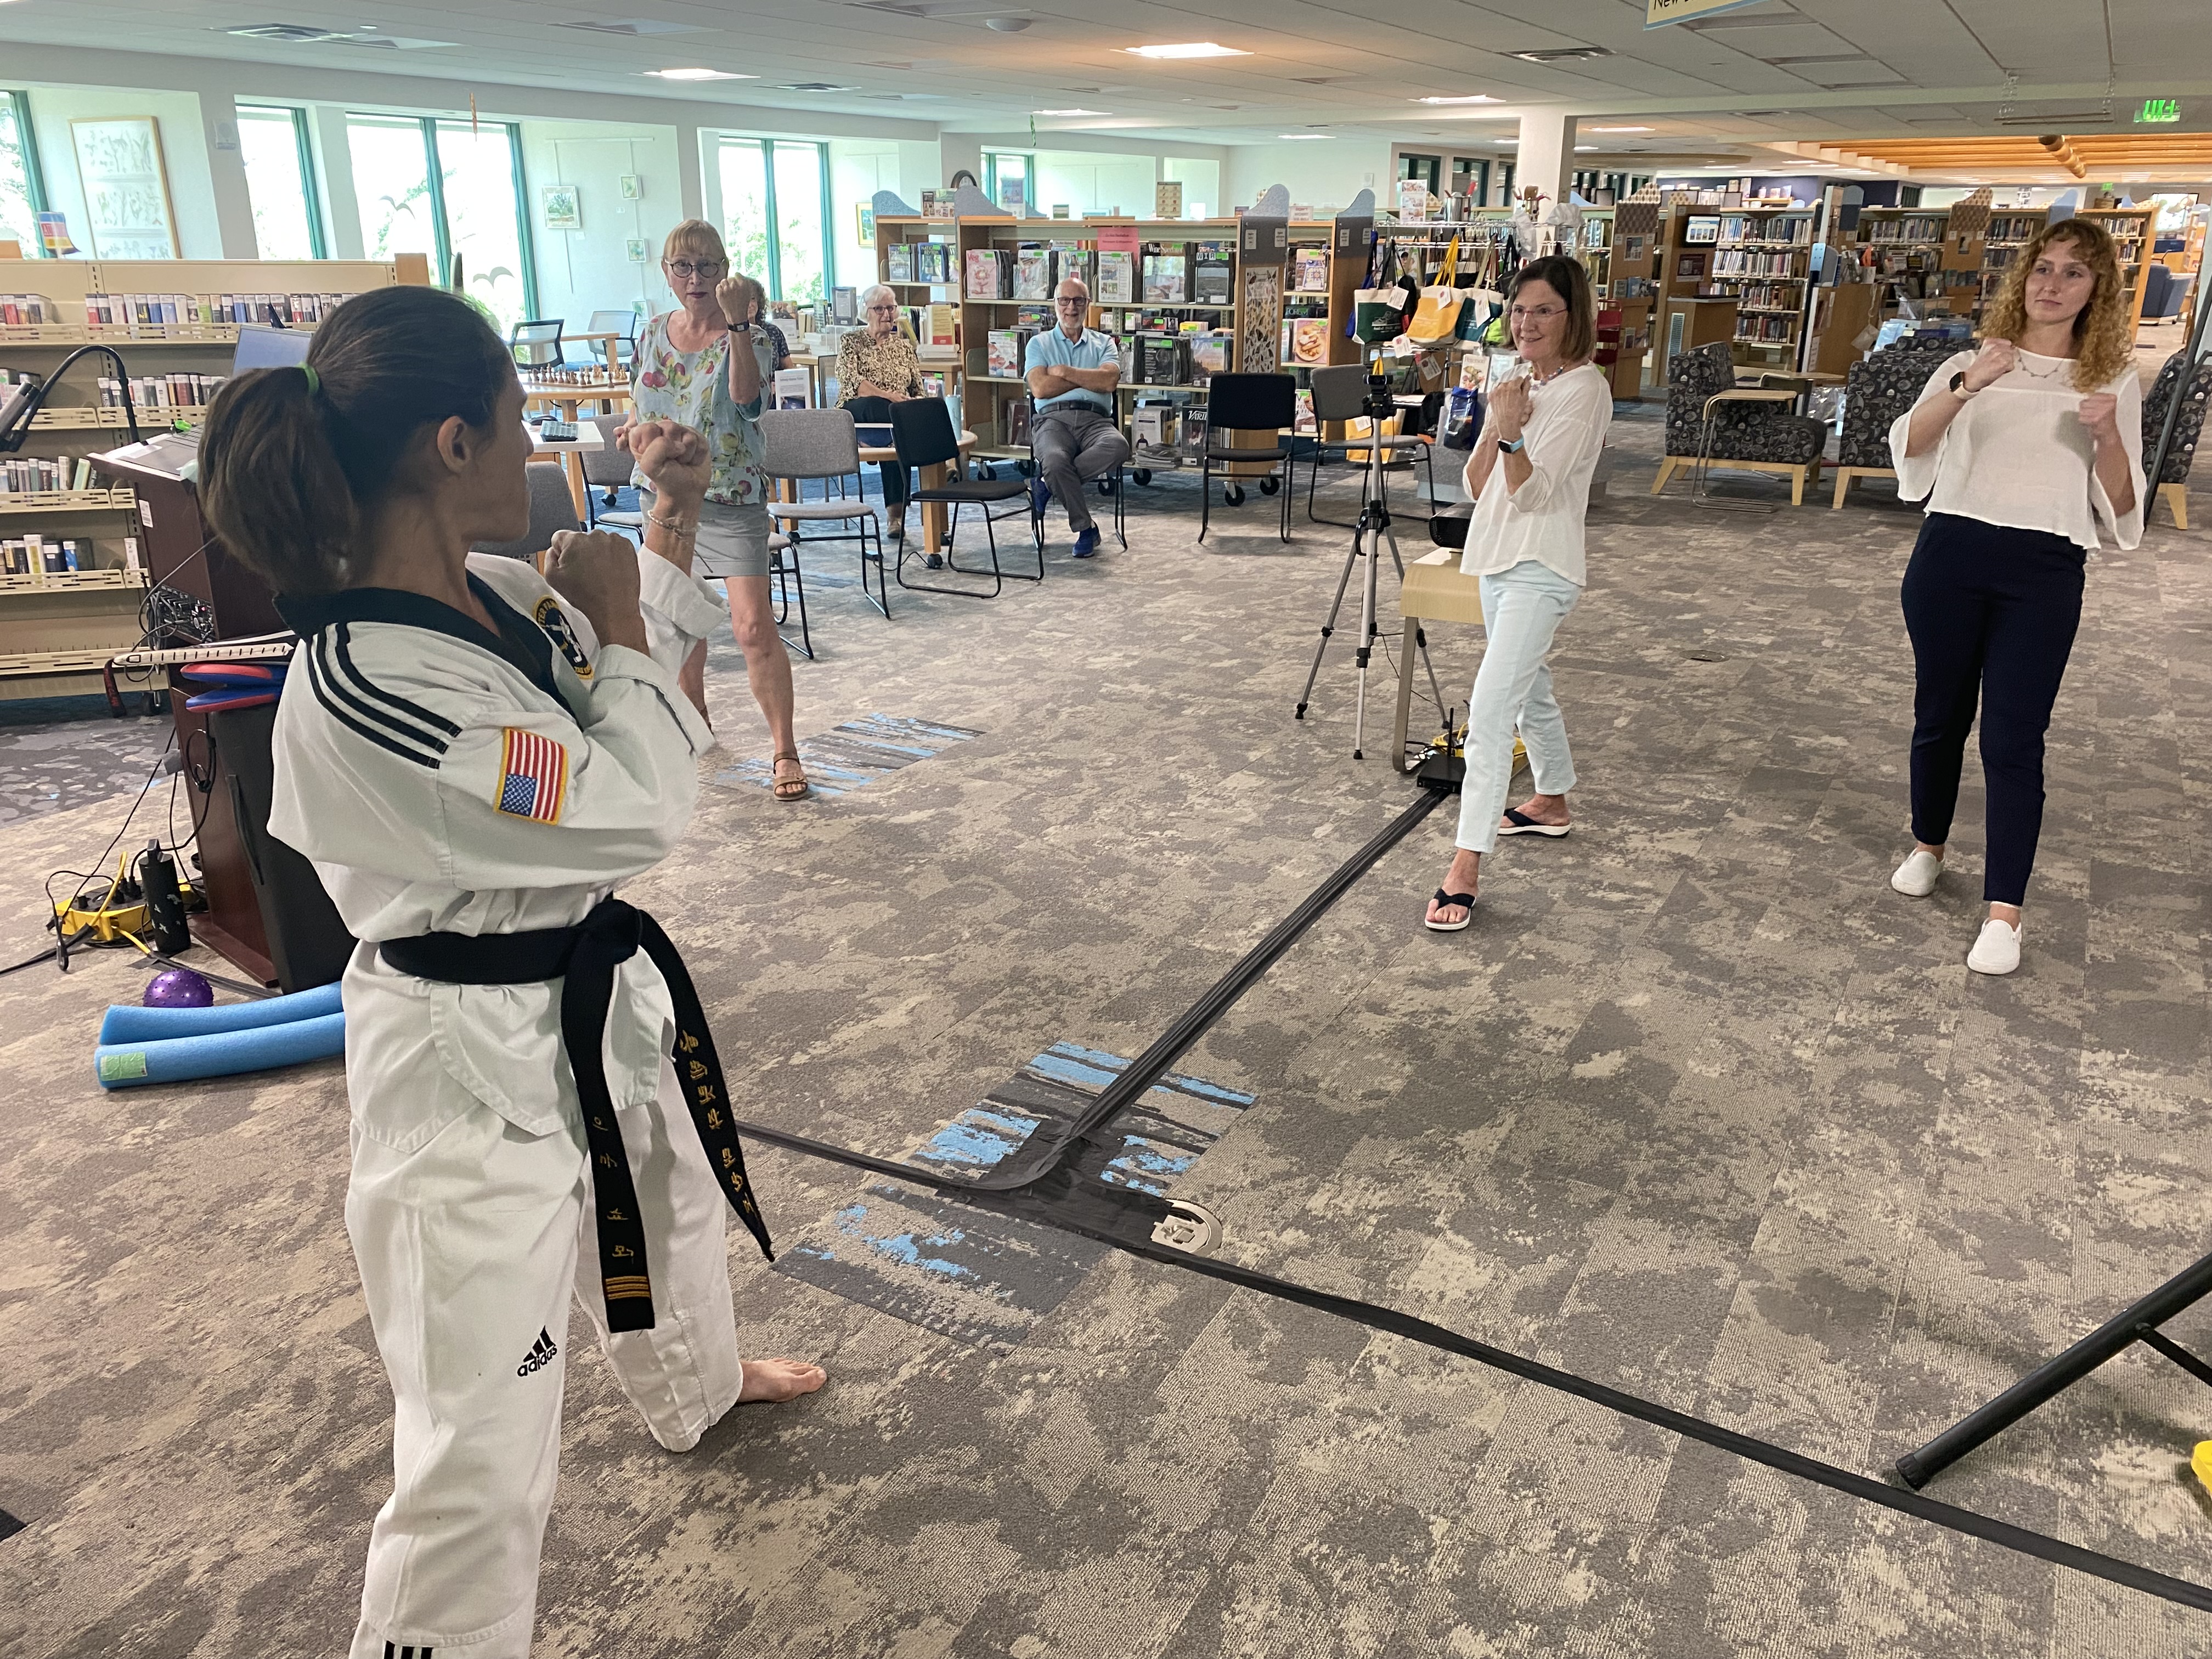 Eden teaching a martial arts class to a group of women in the Sanibel Public Library.